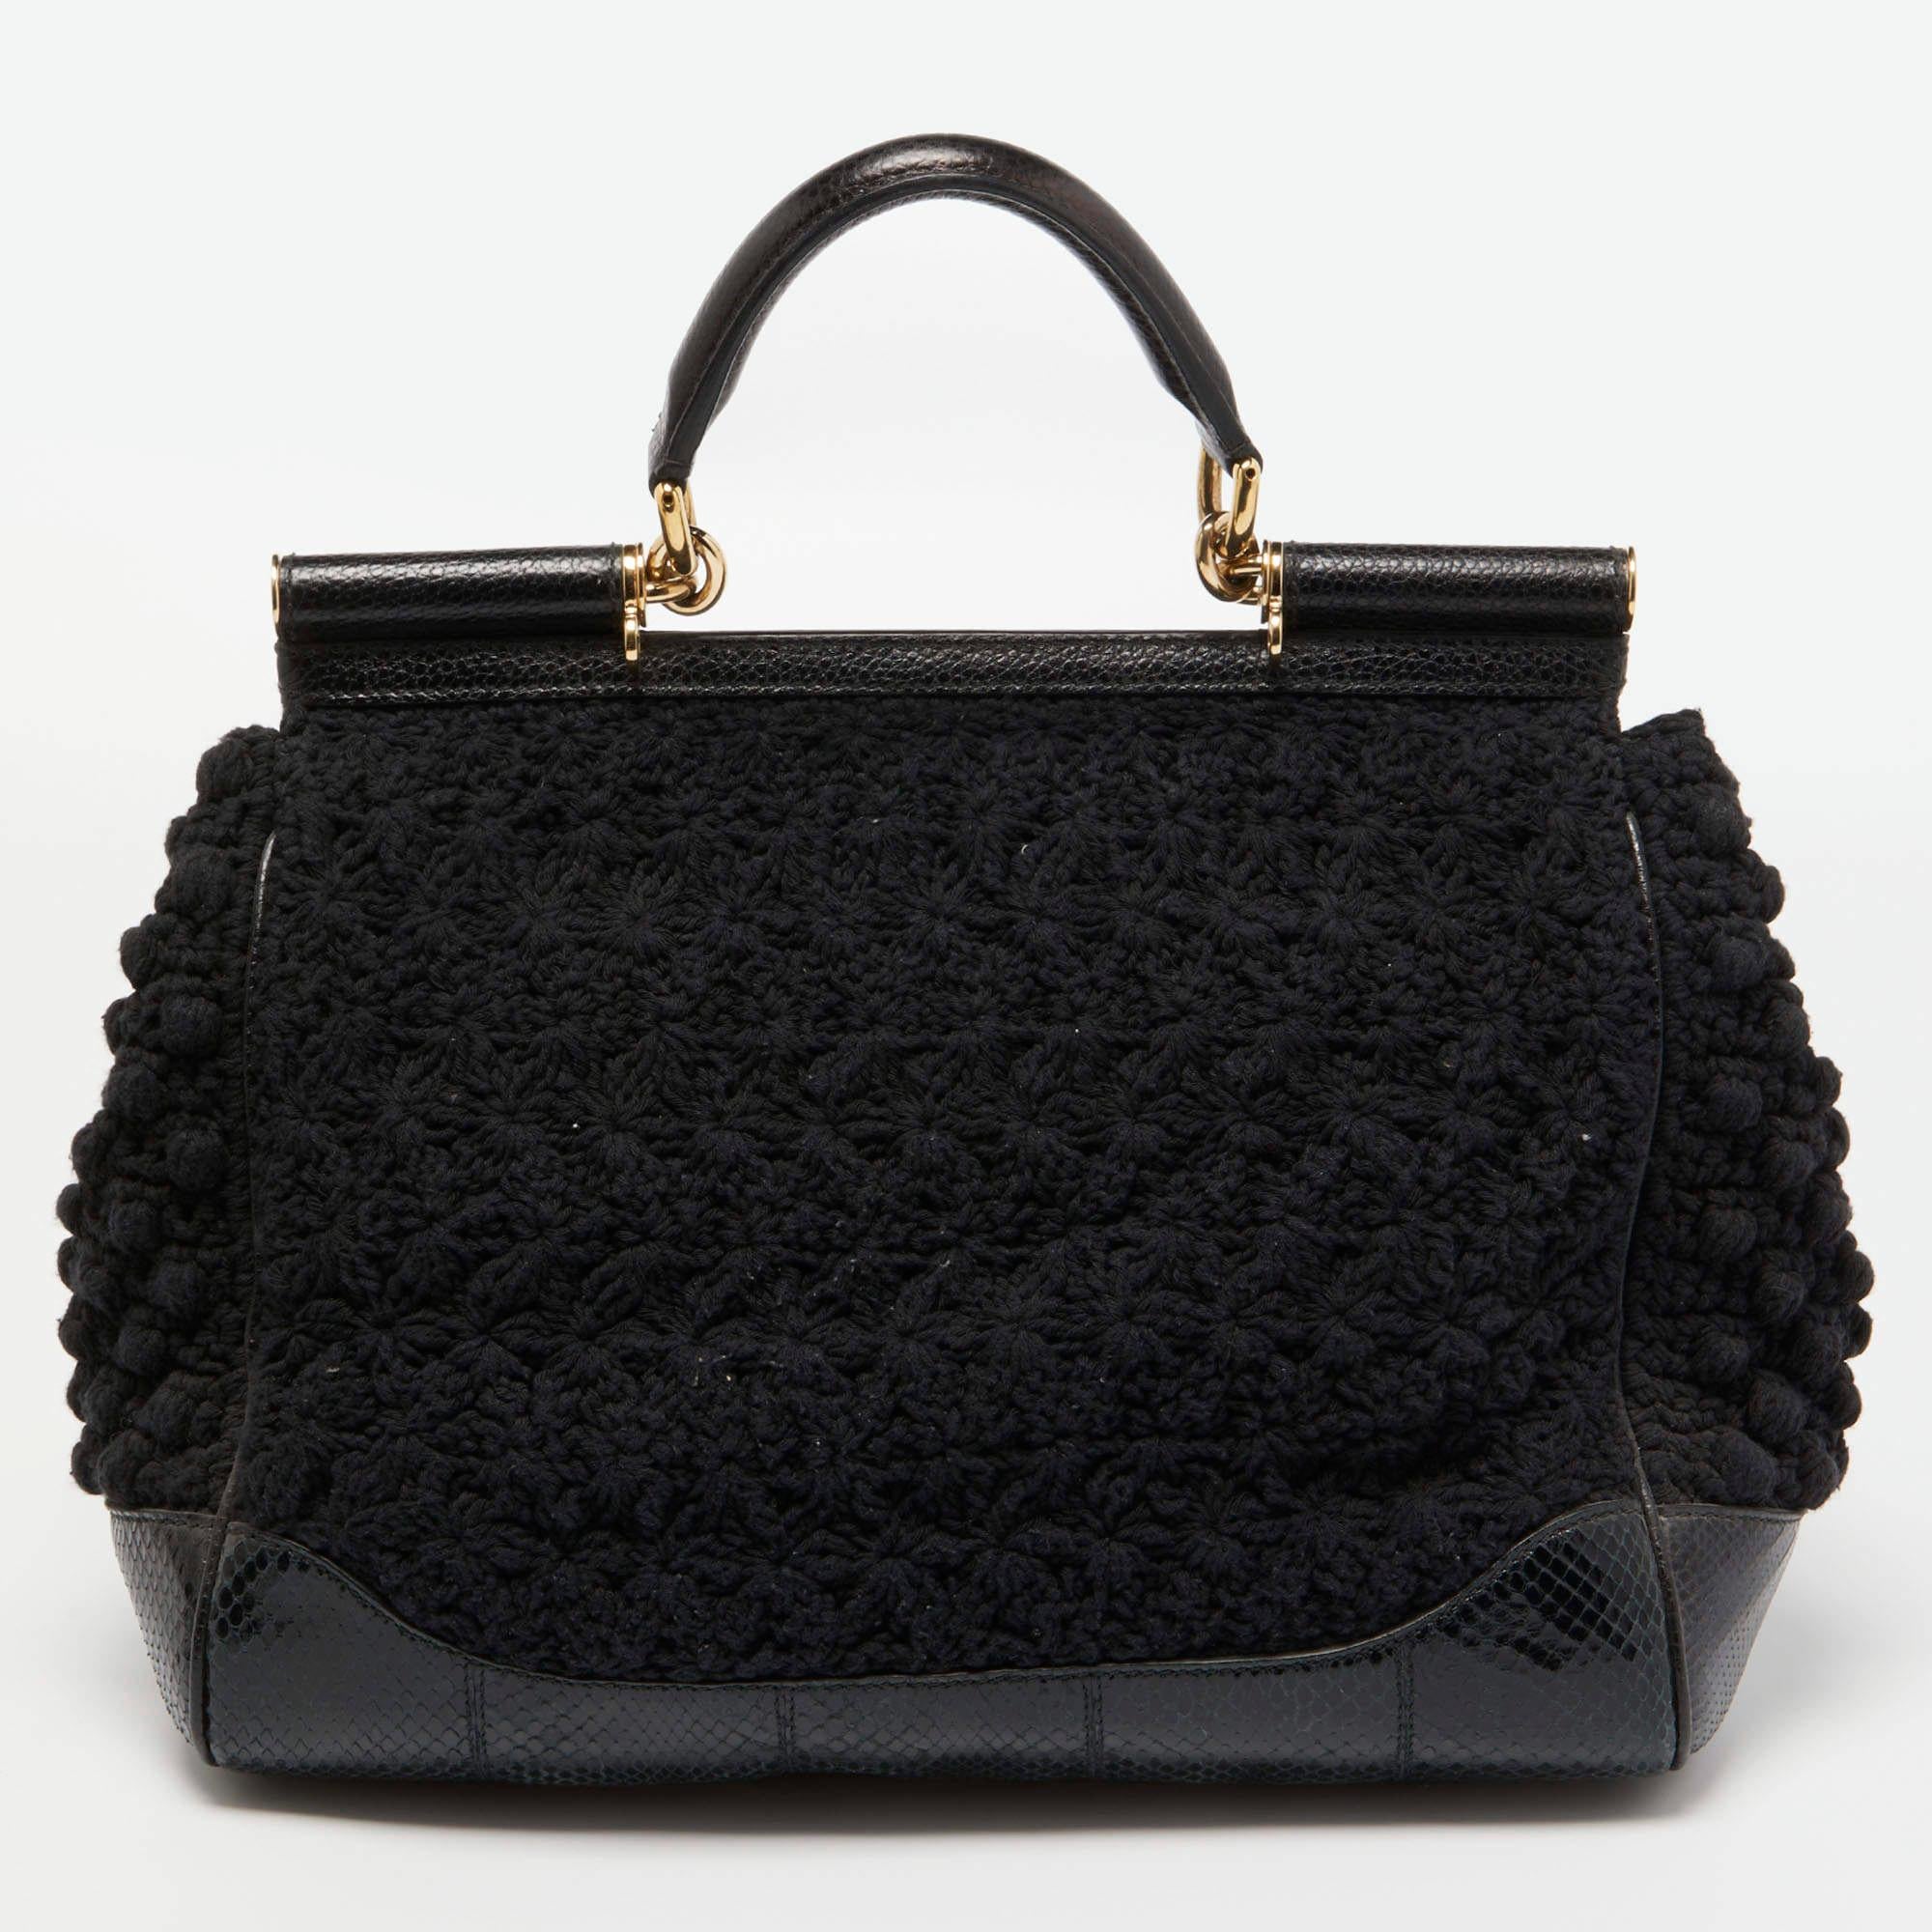 Dolce & Gabbana Black Crochet and Watersnake Large Miss Sicily Top Handle Bag 4